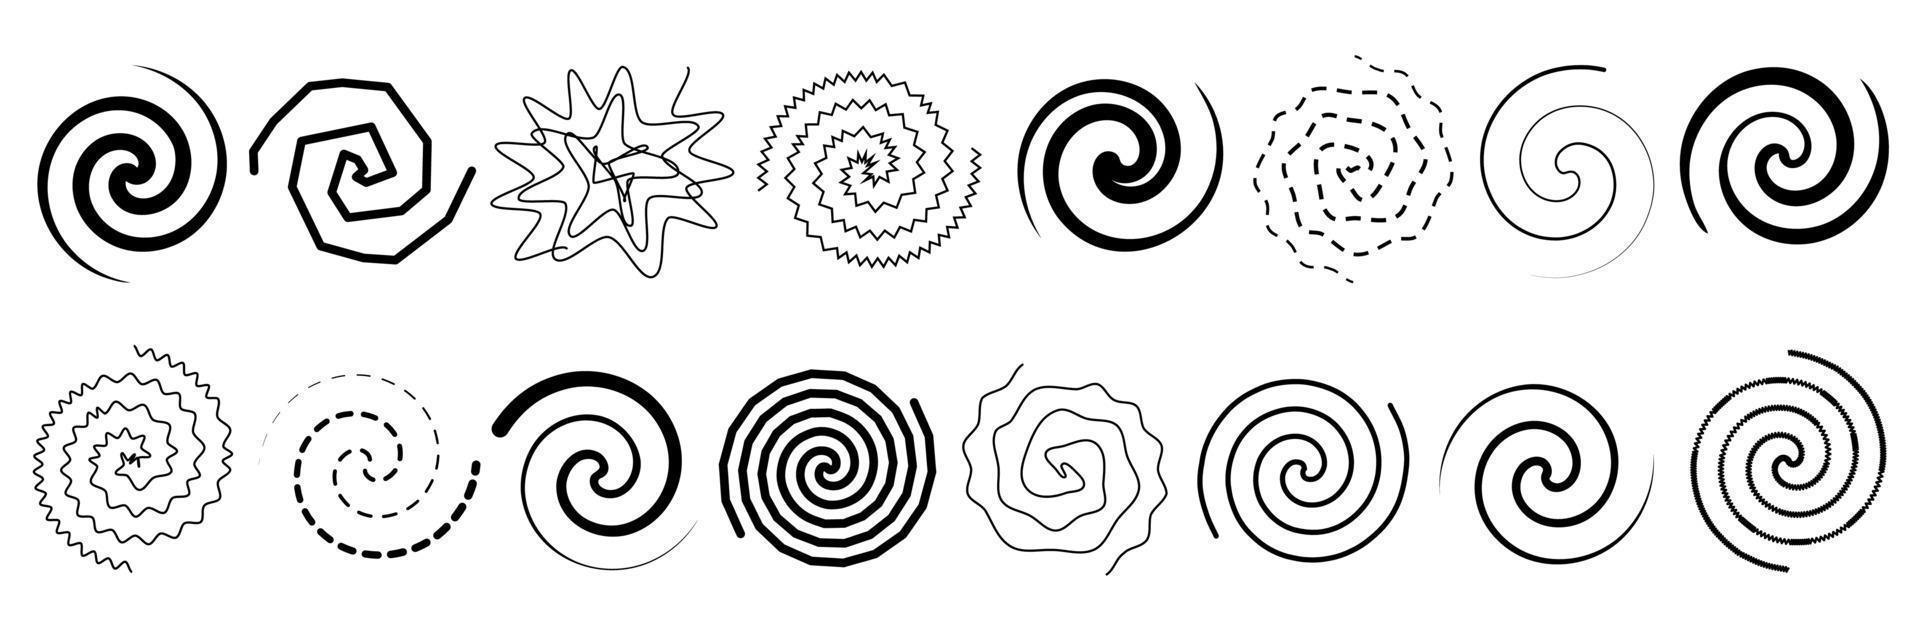 Set of abstract spirals and twirls. Vector illustration of lines twisted in circle. Black and white drawing of signs of round swirls and wavy whirls.